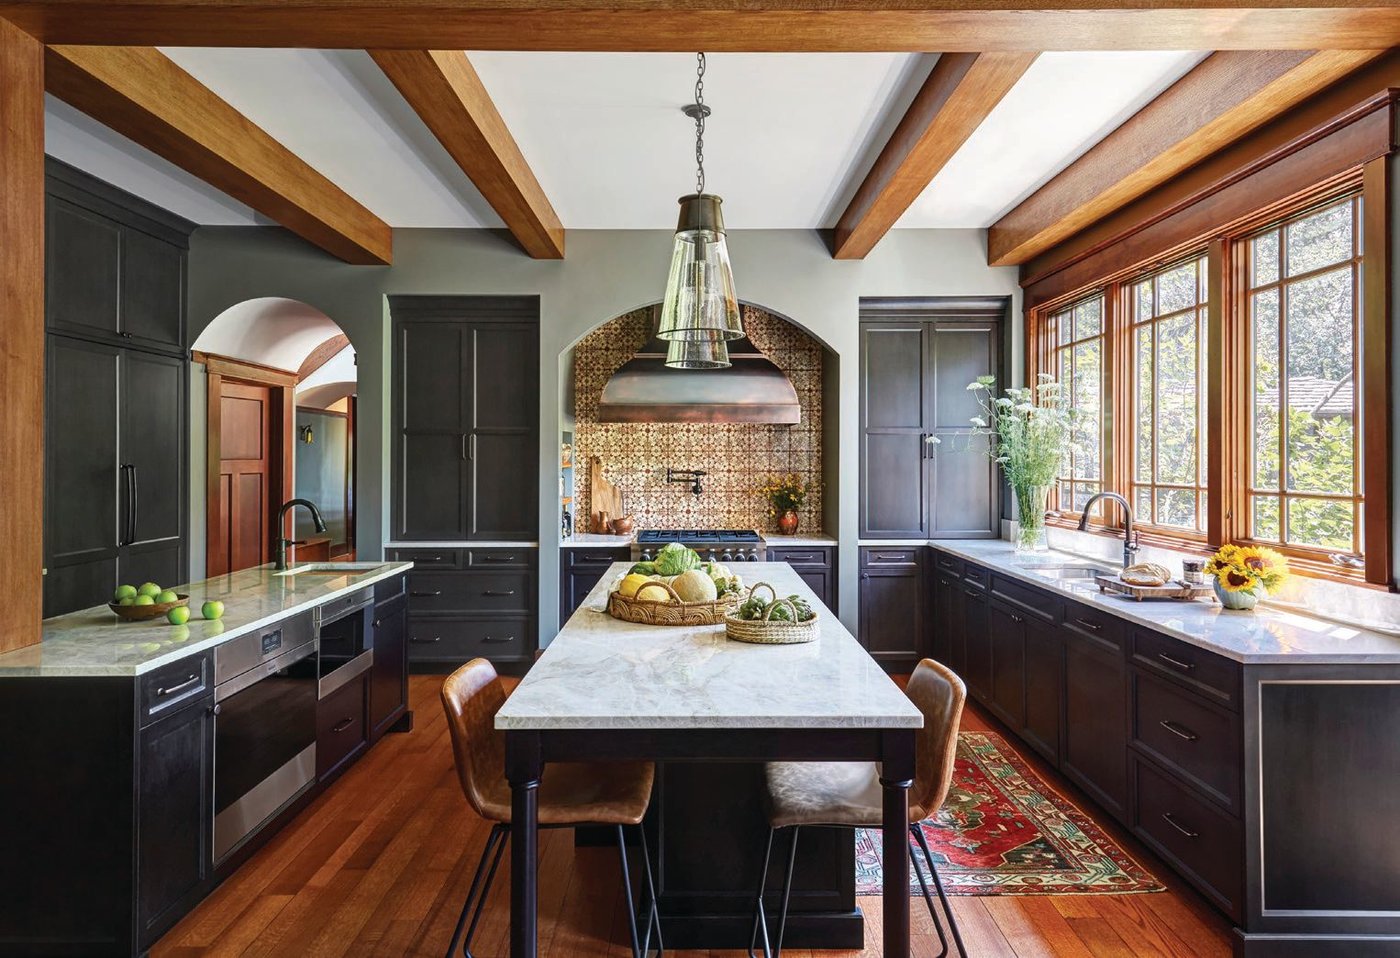 The kitchen combines light tones as seen in the Taj Mahal quartzite countertops with moodier hues a la the PB Kitchen Design cabinets. The pendants are from Circa Lighting PHOTO BY MICHAEL KASKEL